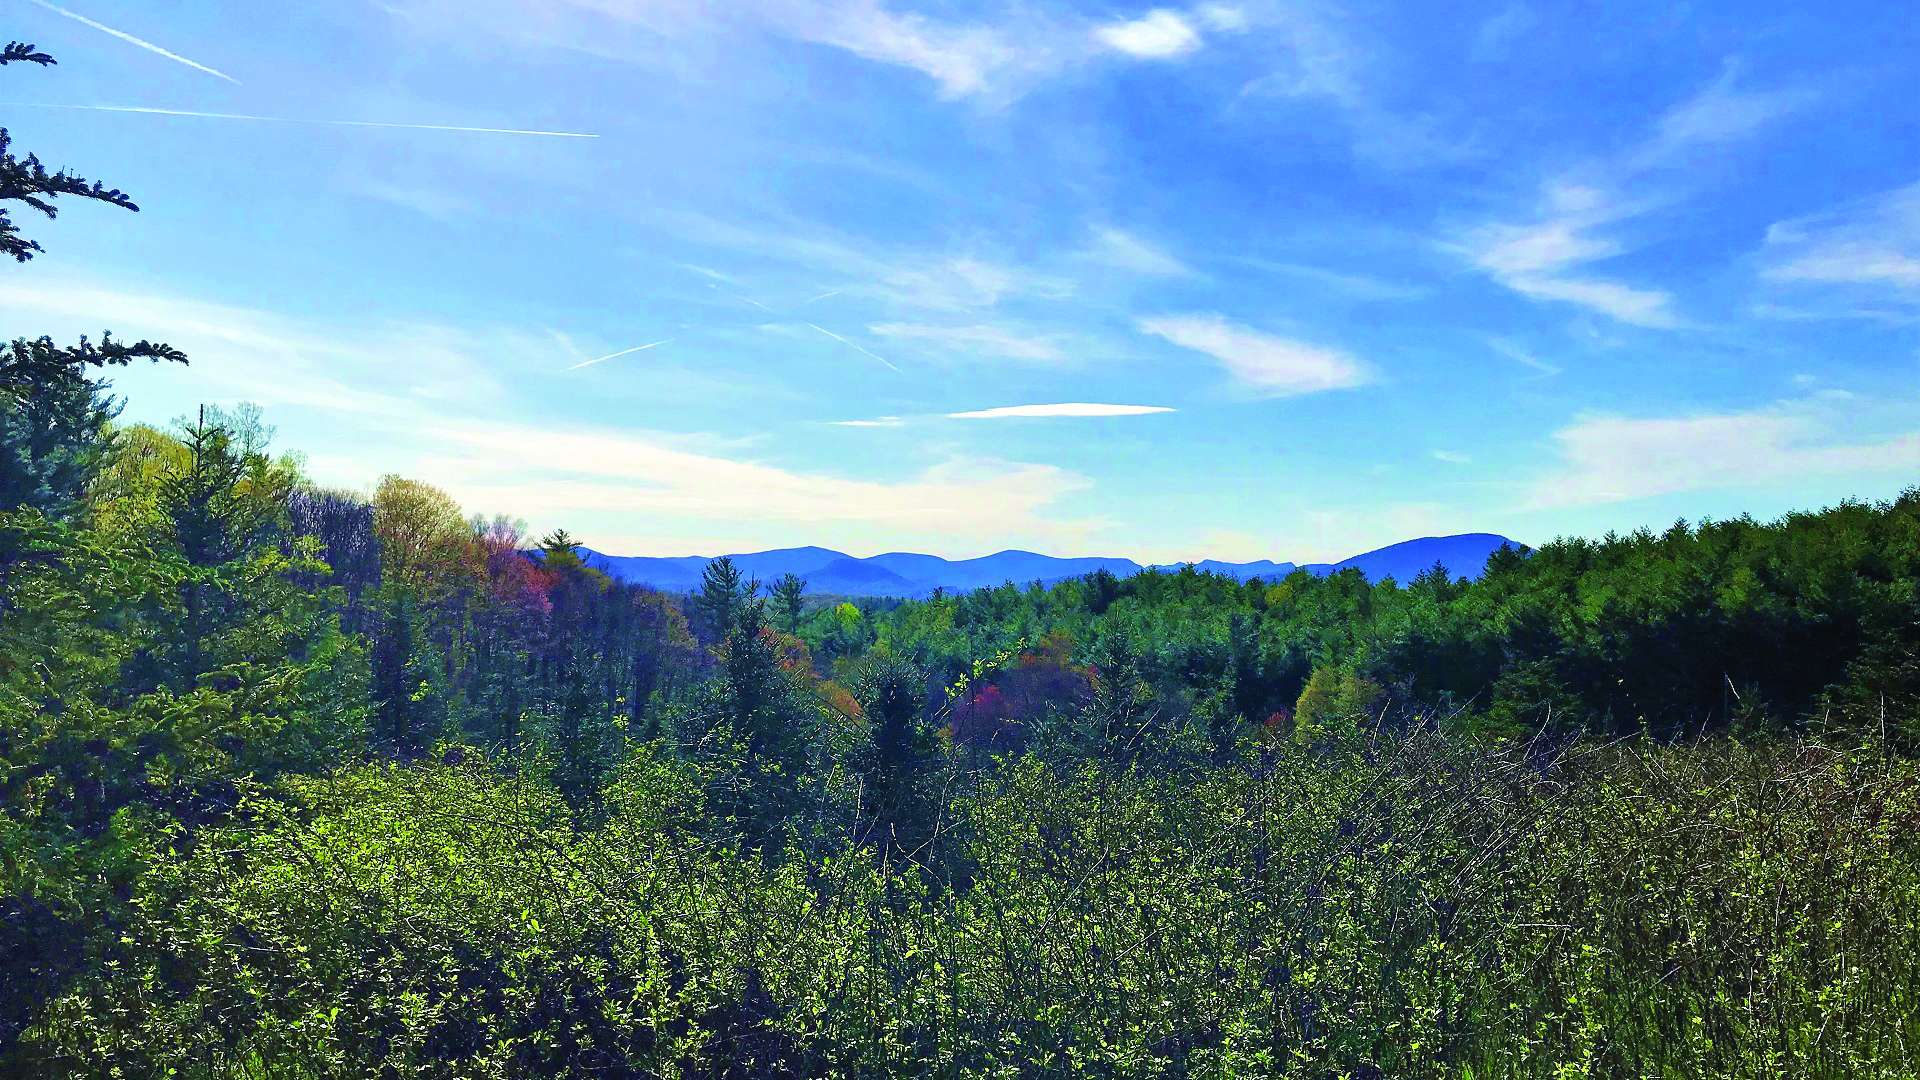 Offered at only $50,000, this 2.85 acre parcel is unrestricted and provides an excellent location for your vacation mountain retreat or primary residence. S276